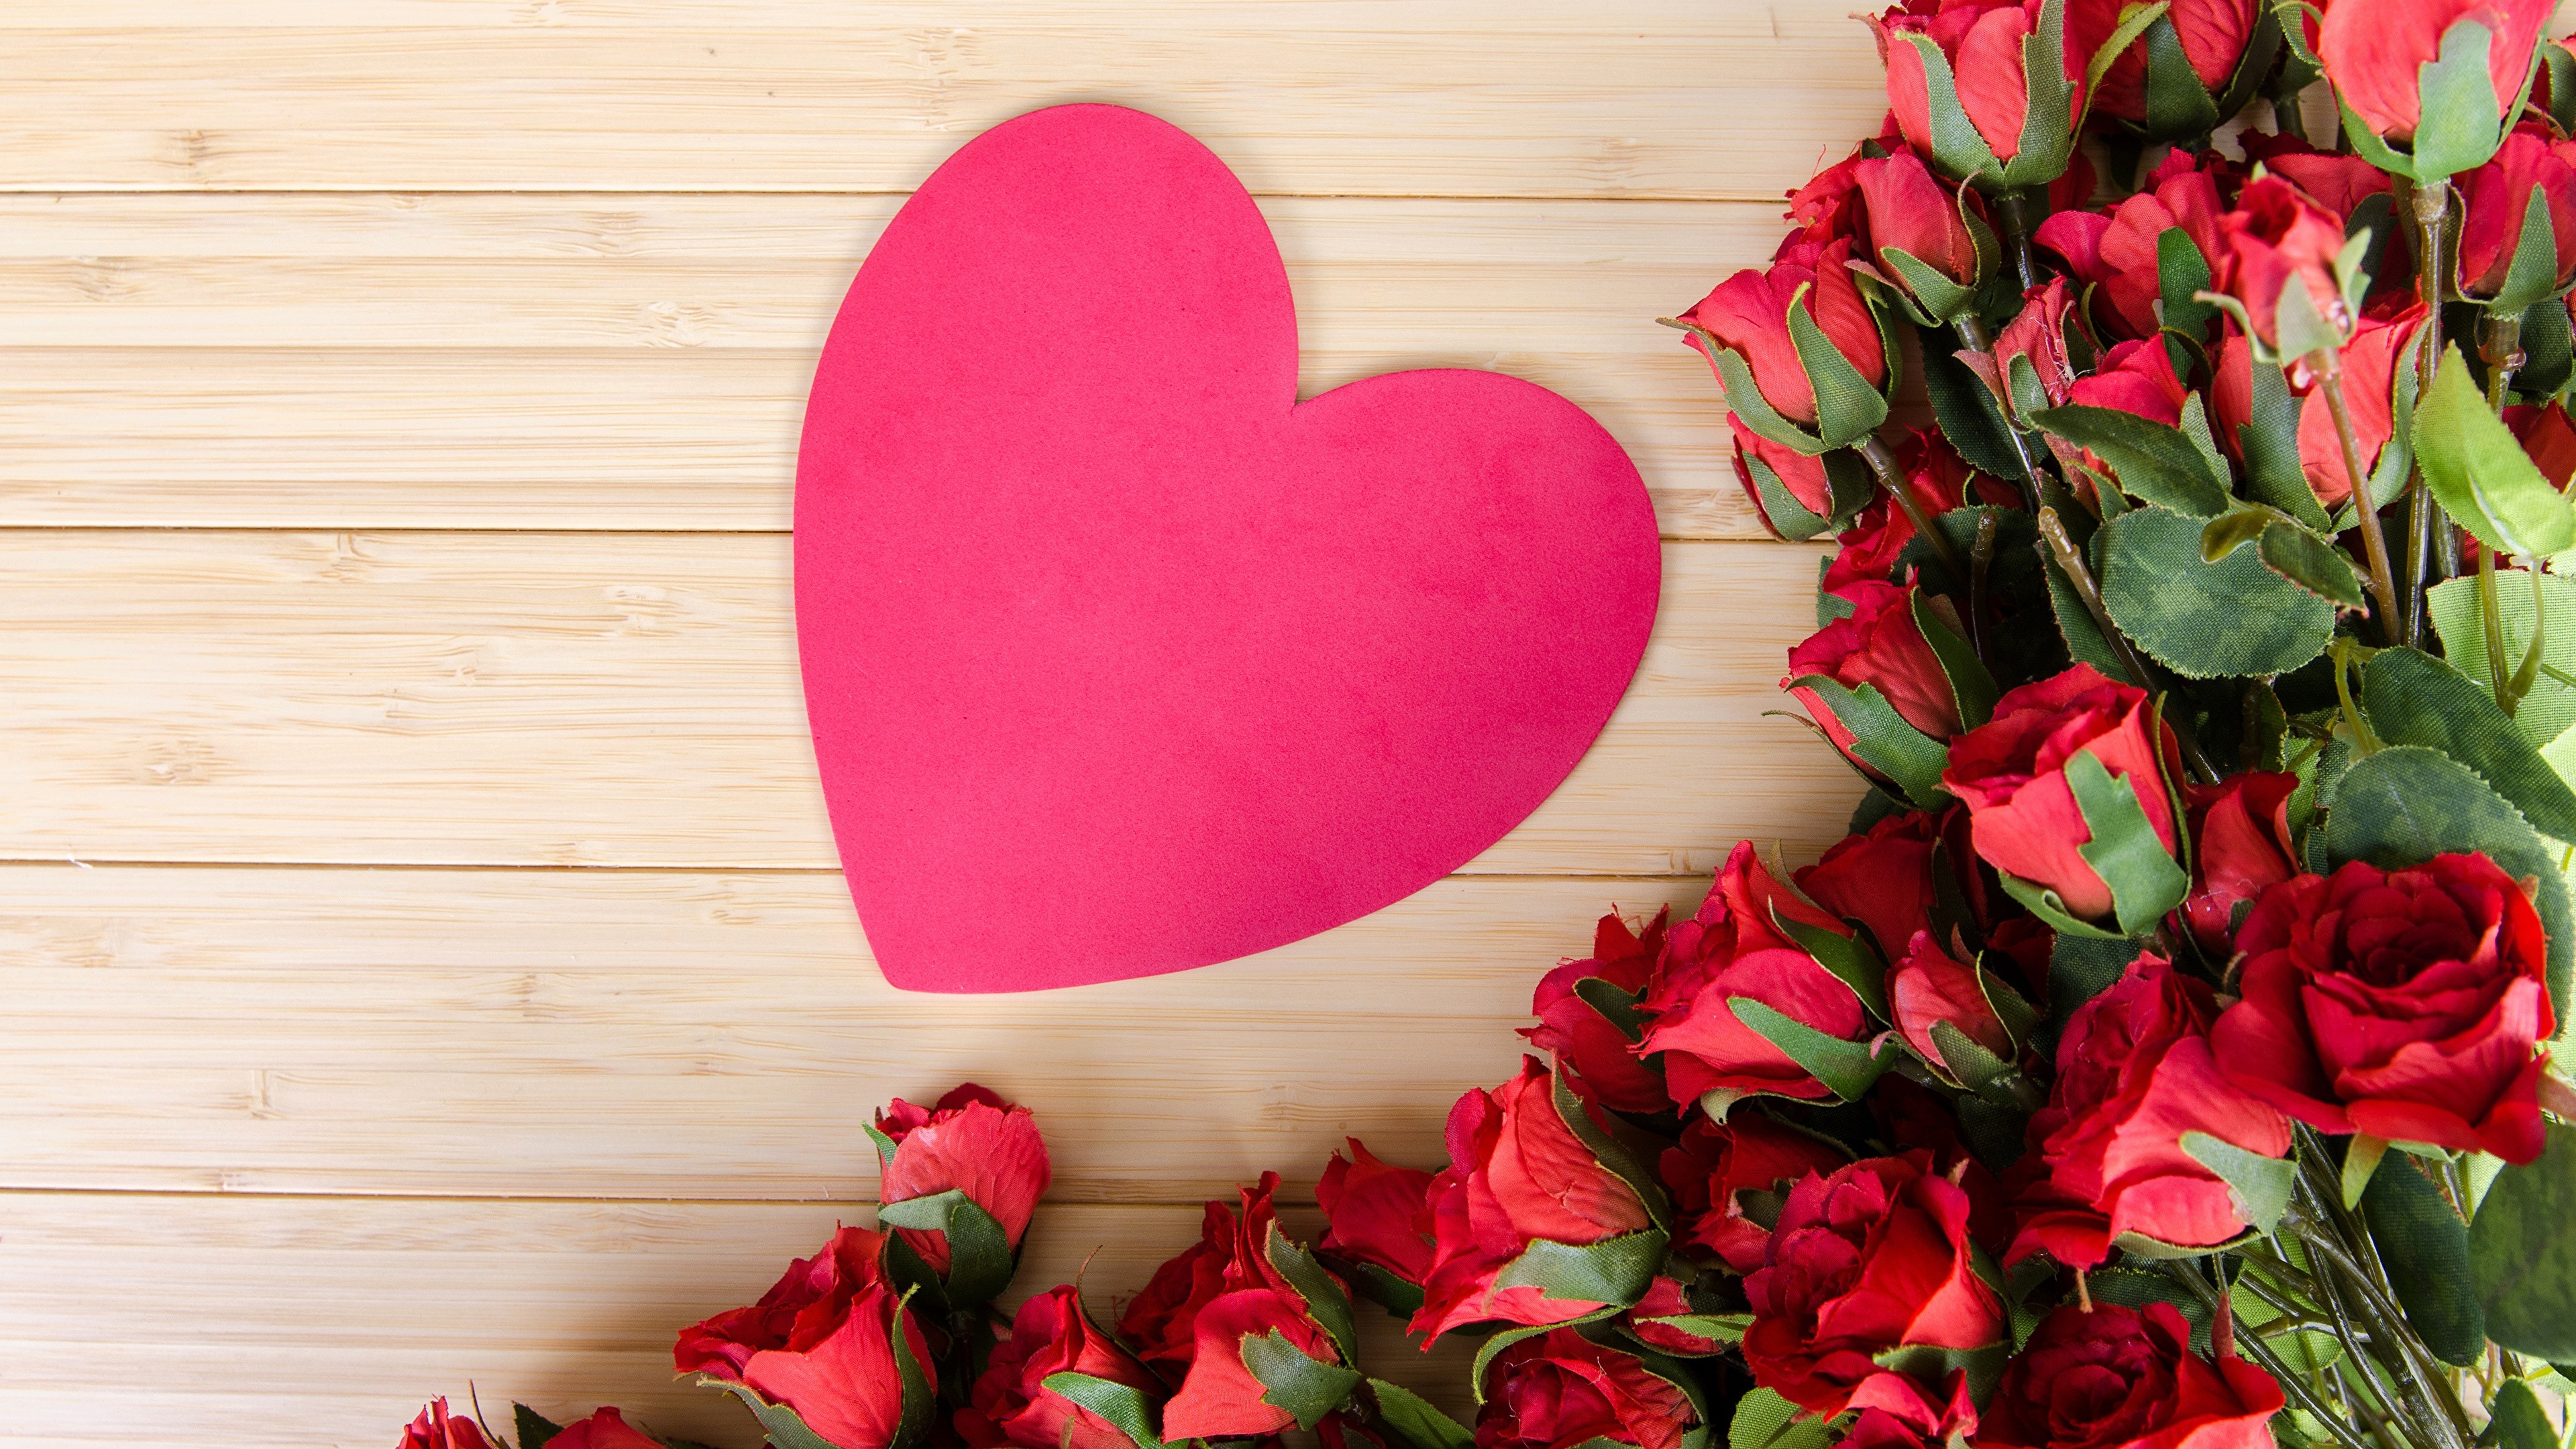 Hearts and Flowers, Love and romance, Heart and rose, Romantic holidays, 3840x2160 4K Desktop